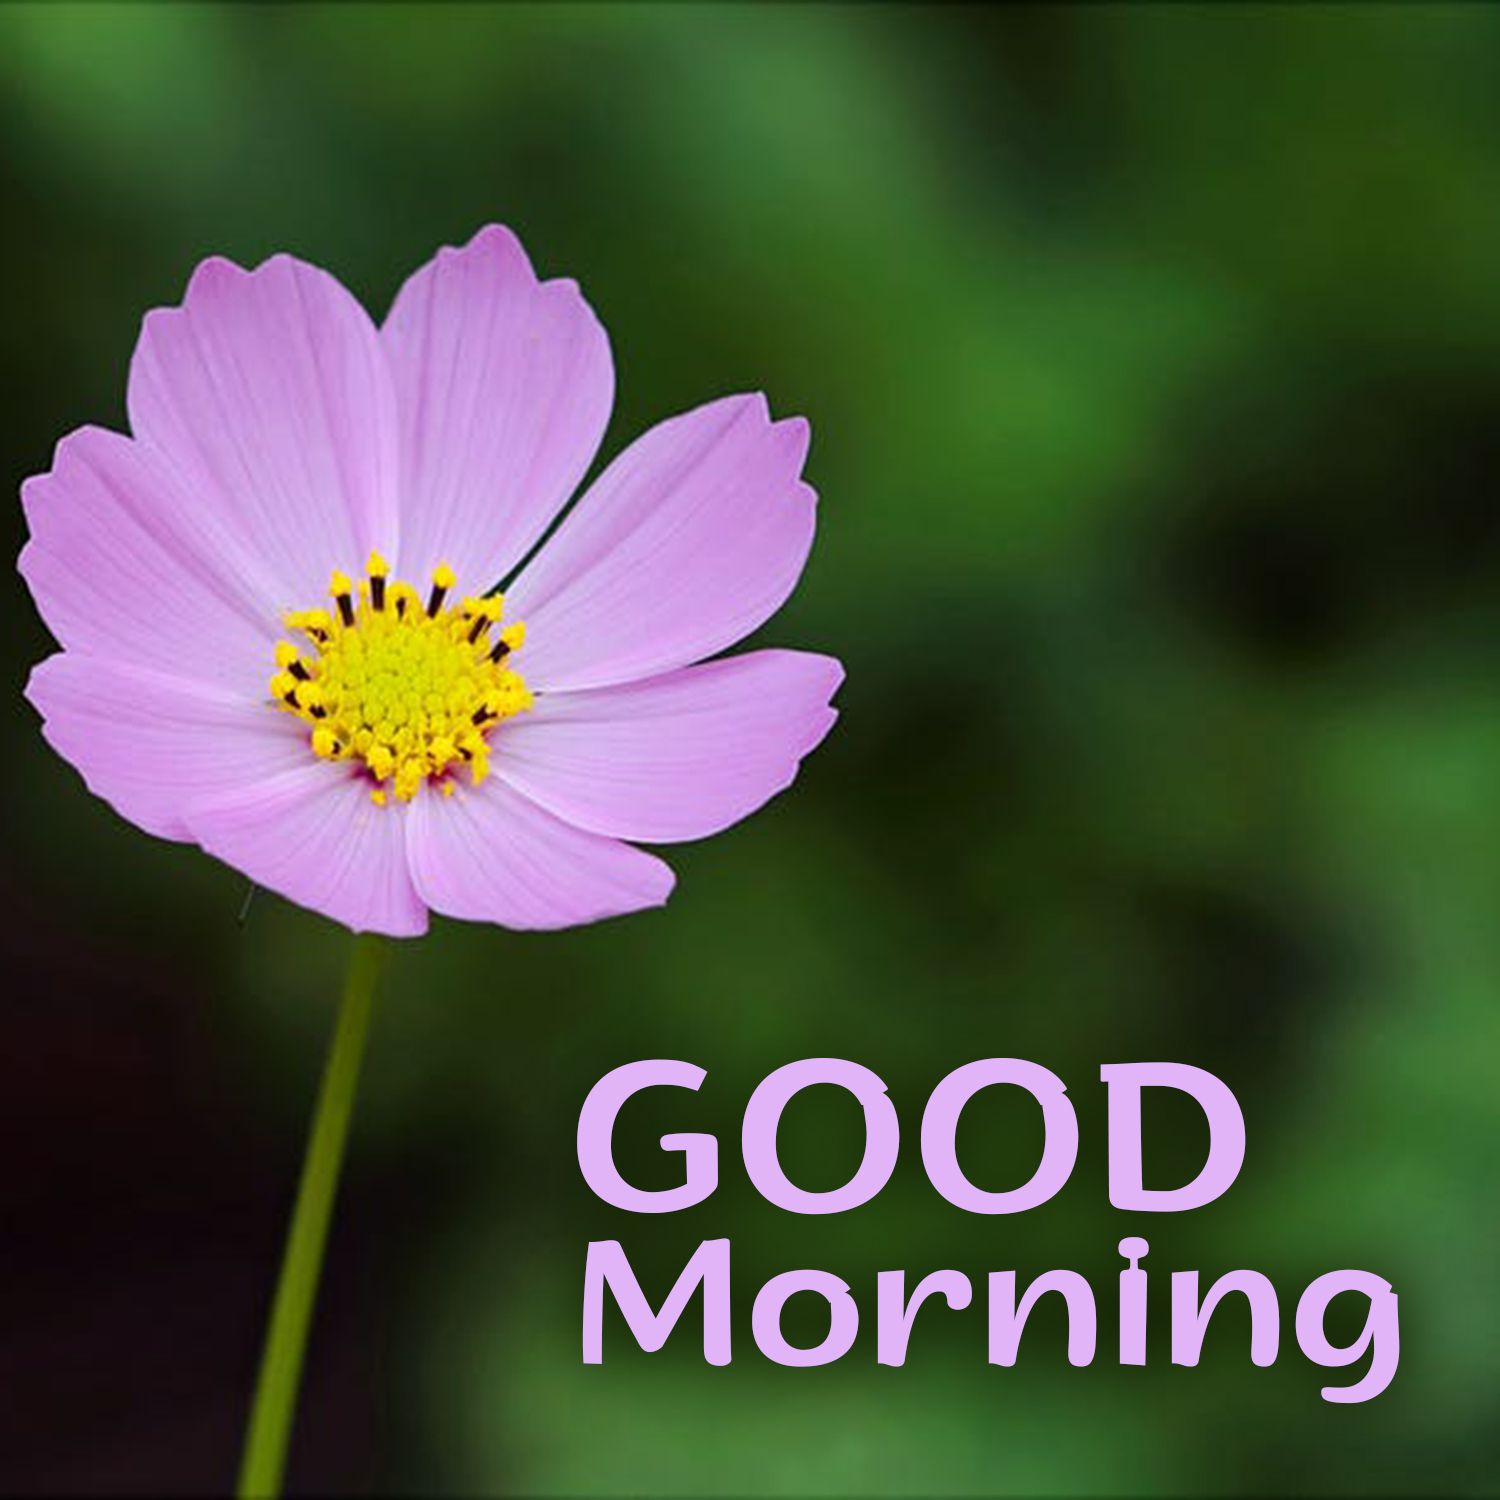 Brighten up the day of your friends with Good Morning flowers Image Morning Image, Quotes, Wishes, Messages, greetings & eCards